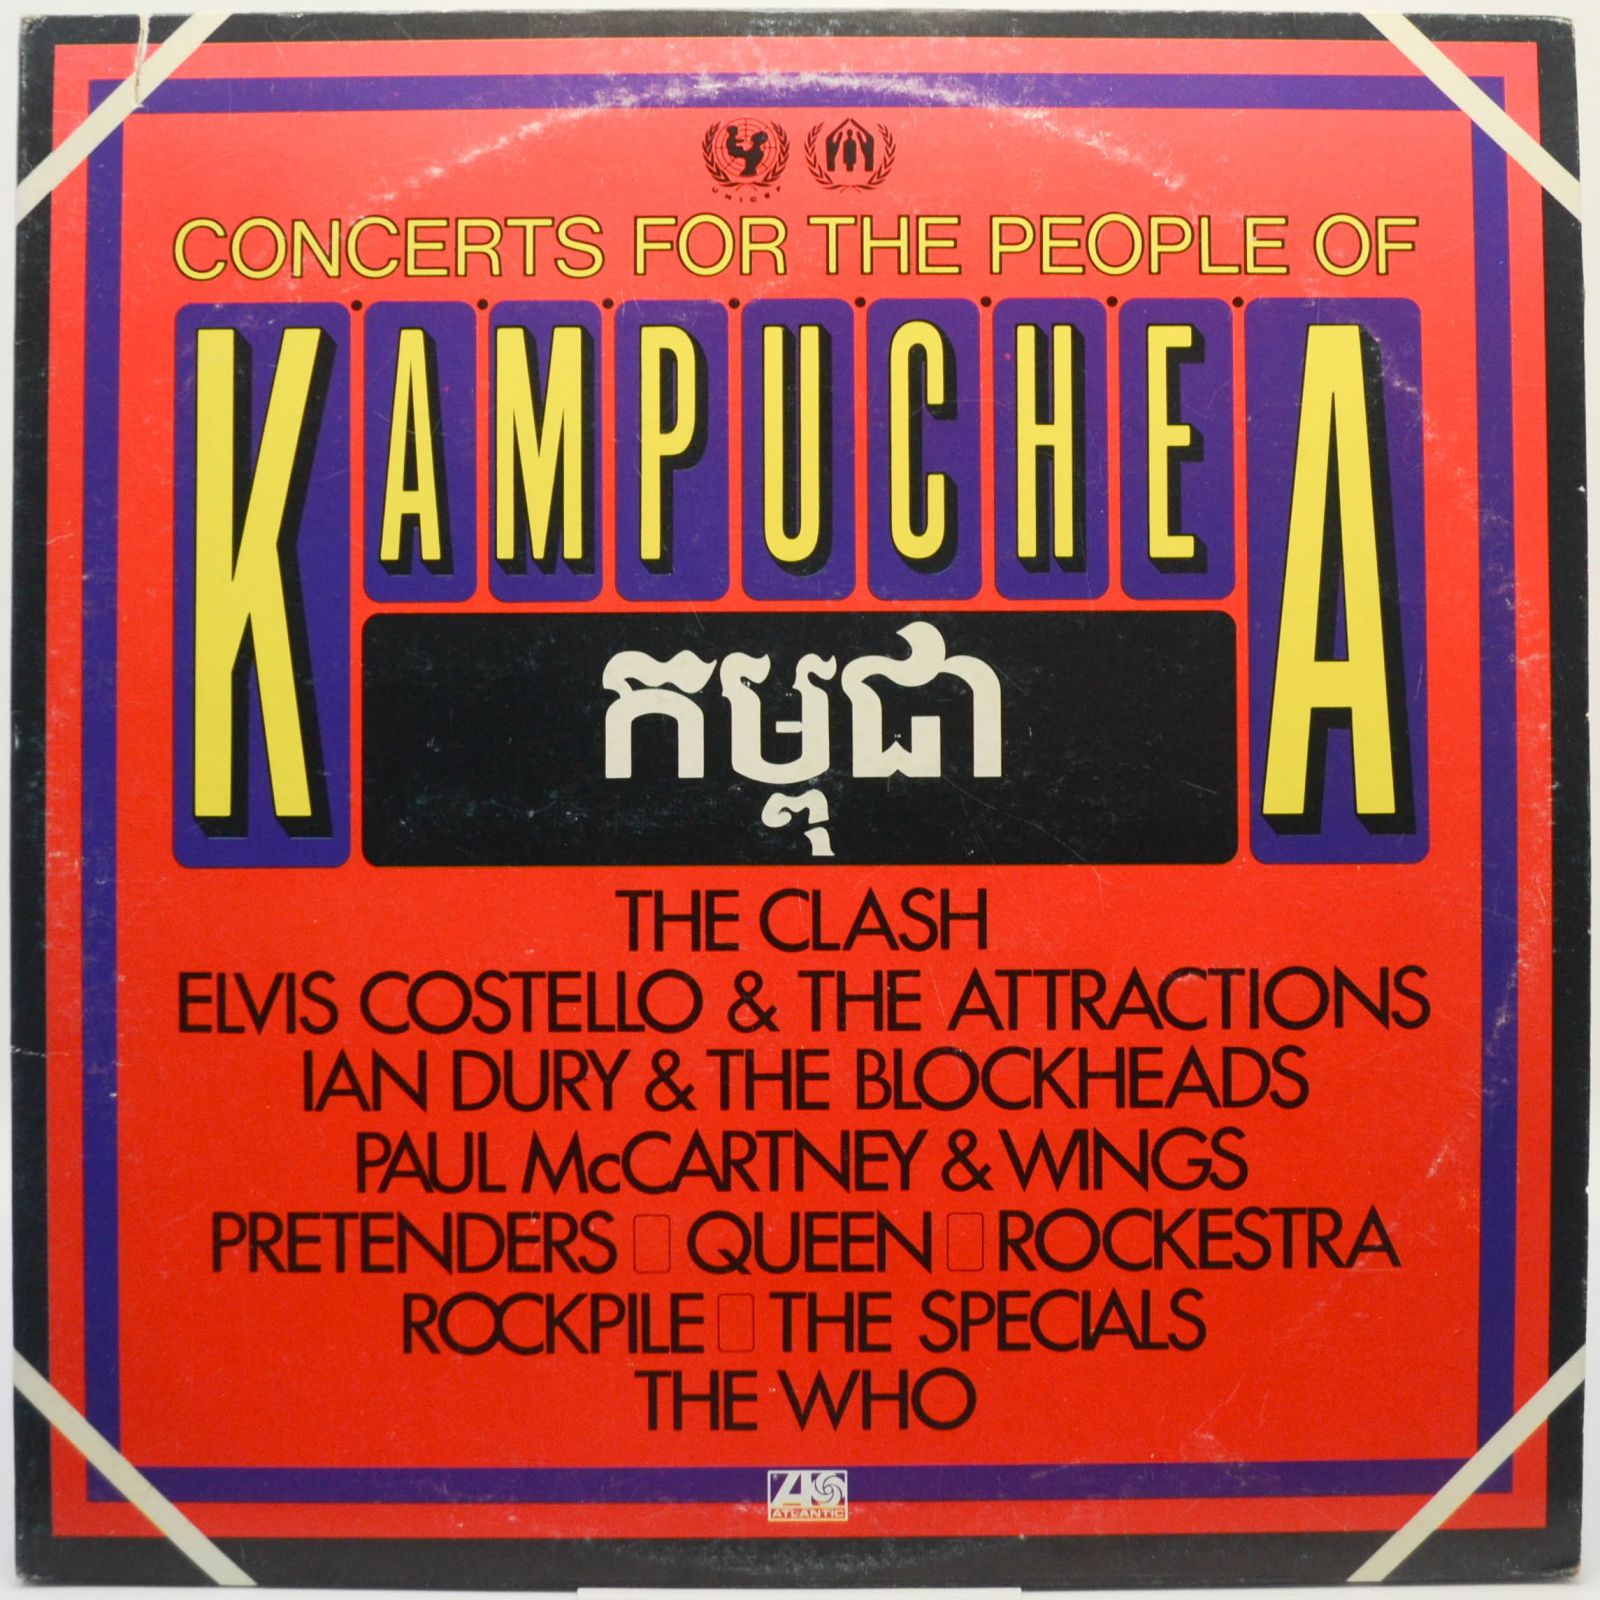 Concerts For The People Of Kampuchea (2LP), 1981